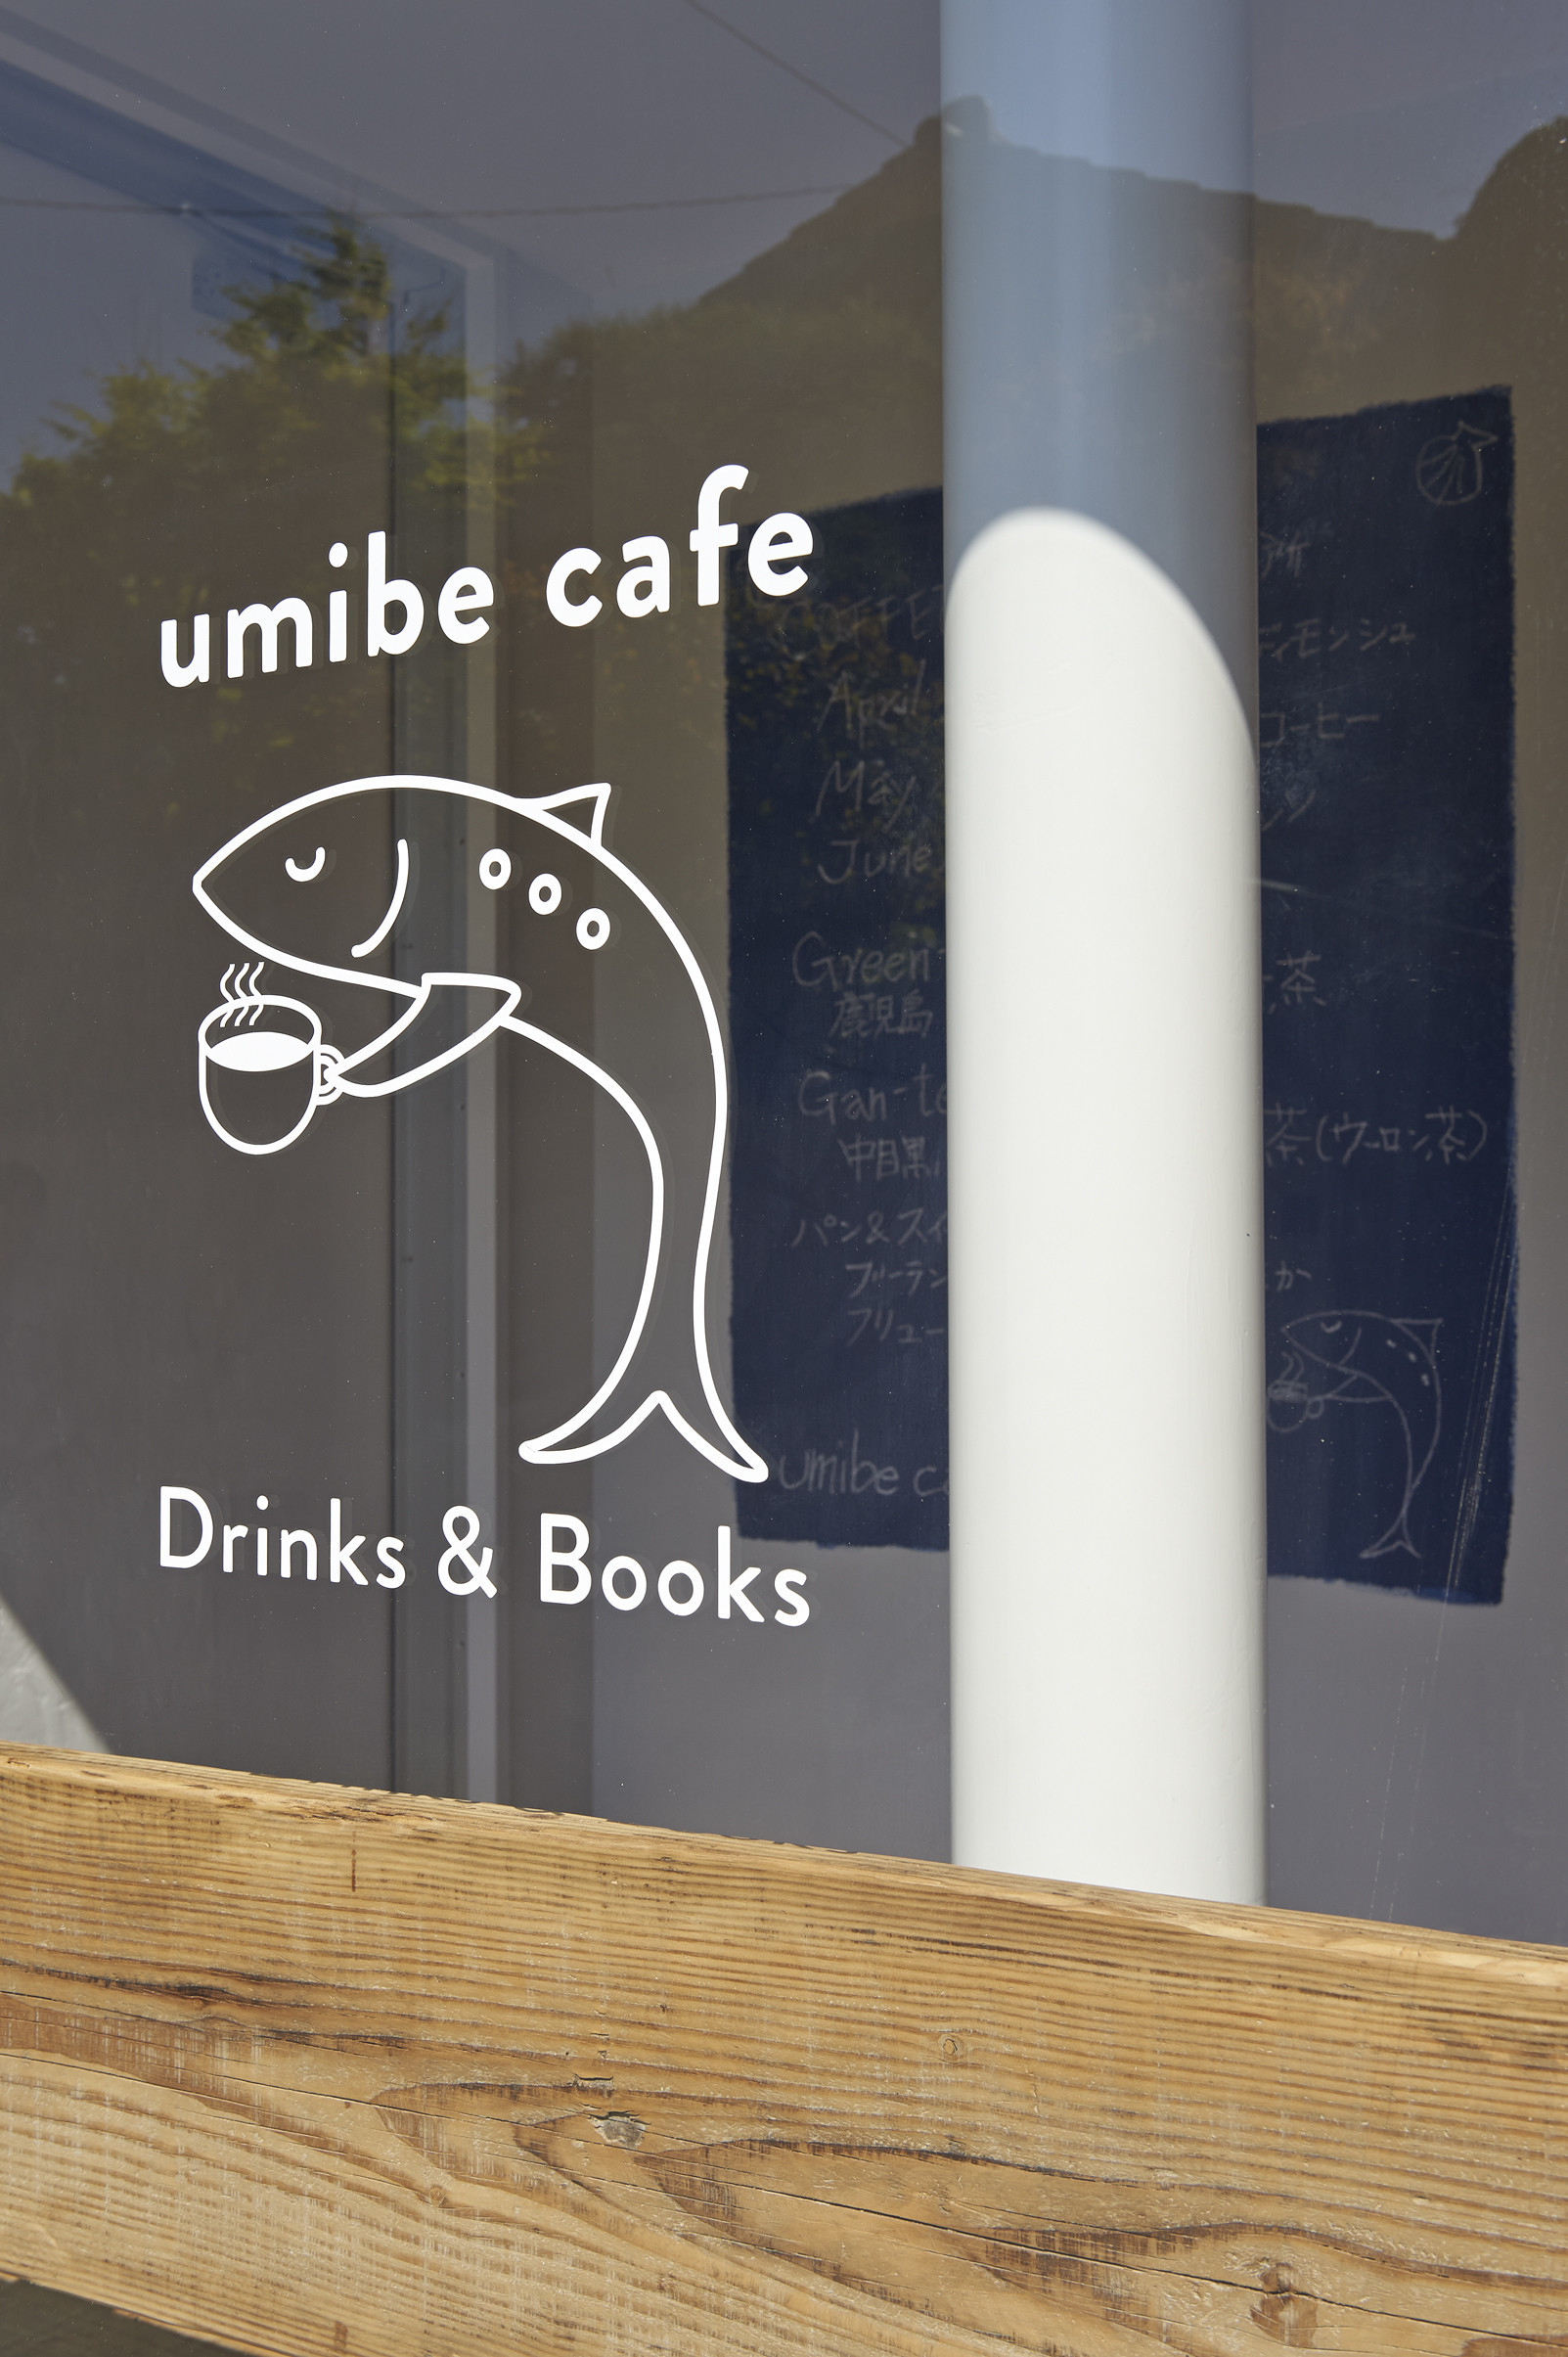 umibe cafeの建築事例写真